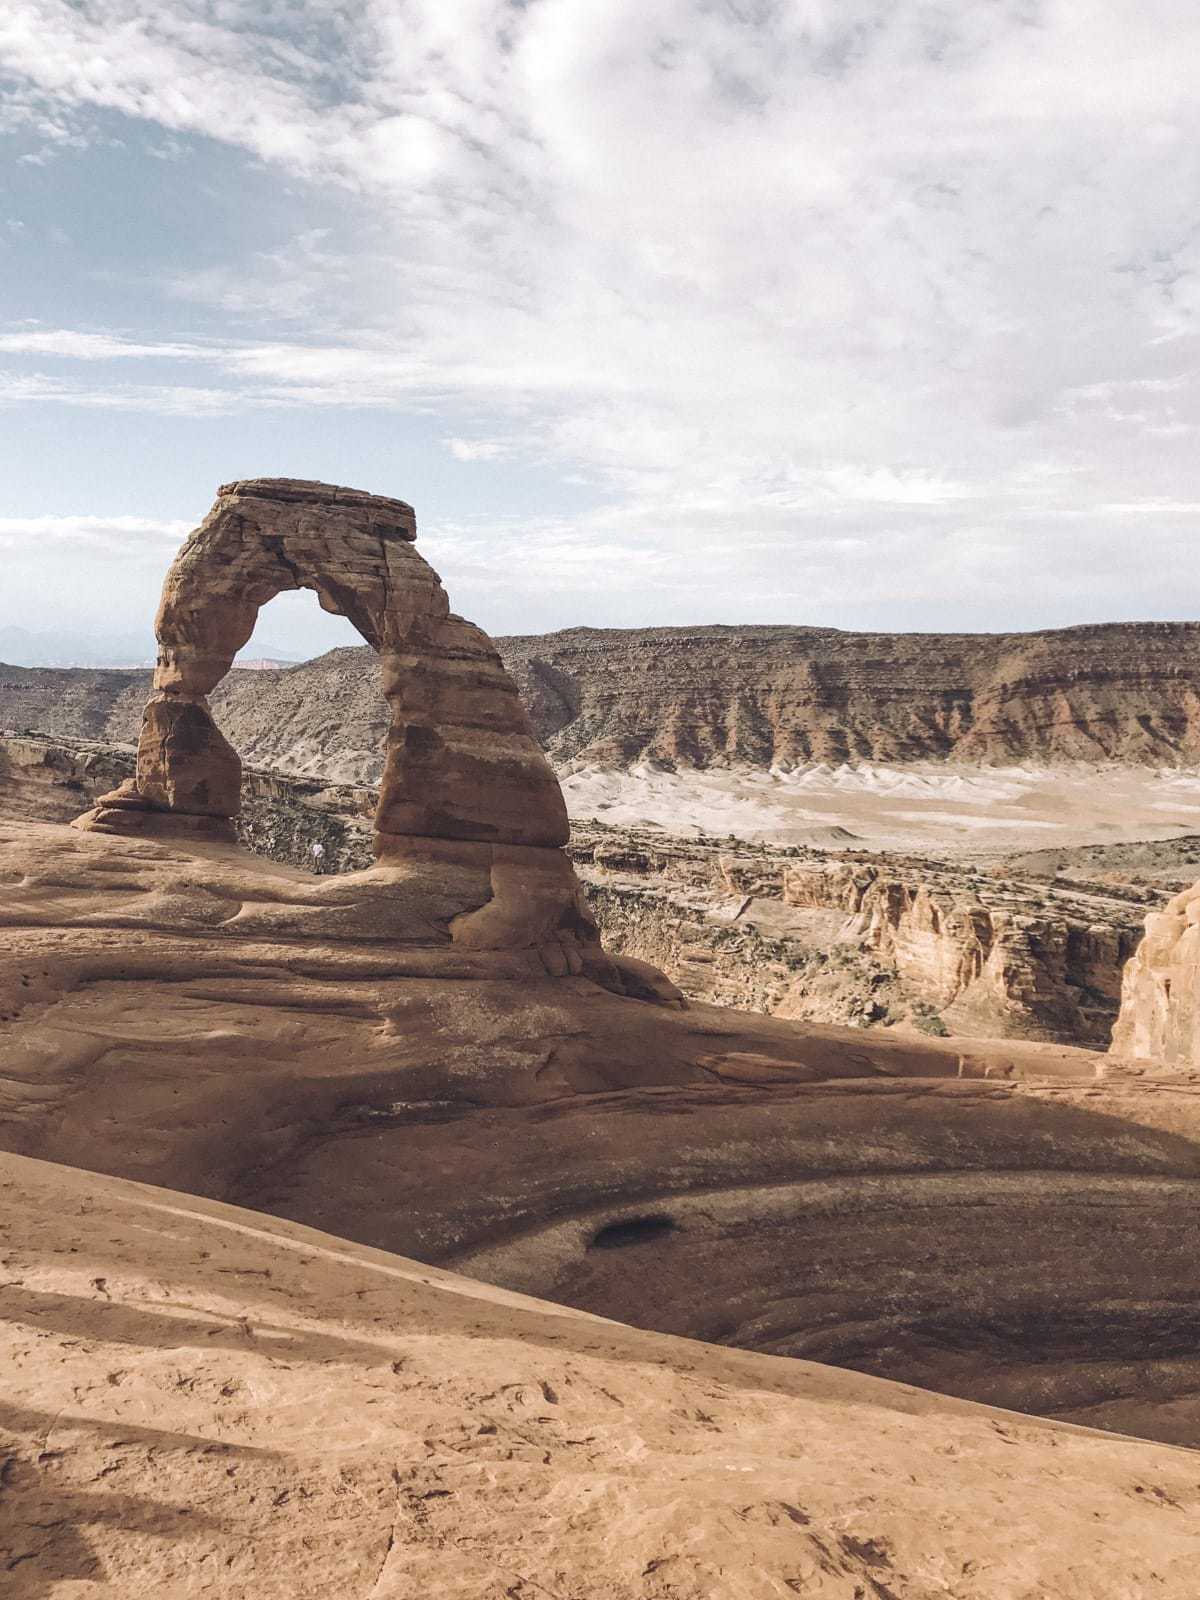 Southern Utah Road Trip Itinerary: 7 Essential Stops You Can't Miss